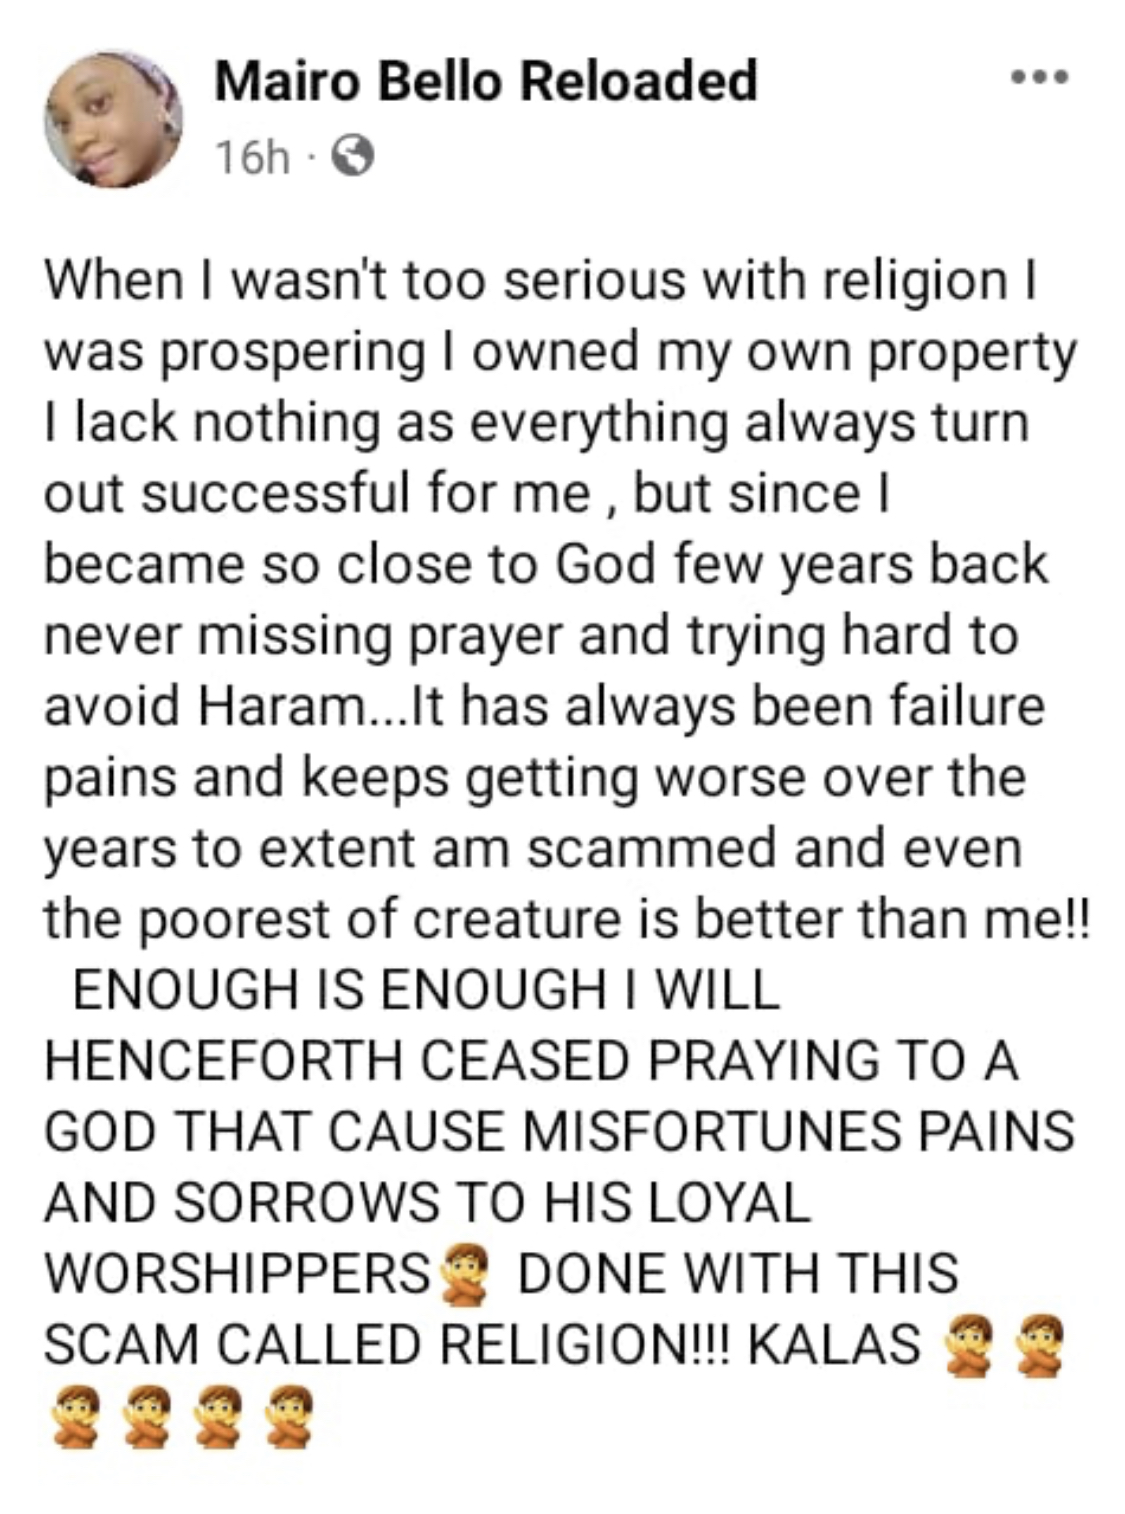 I was successful but since I became close to God I’ve been a failure - Nigerian lady laments